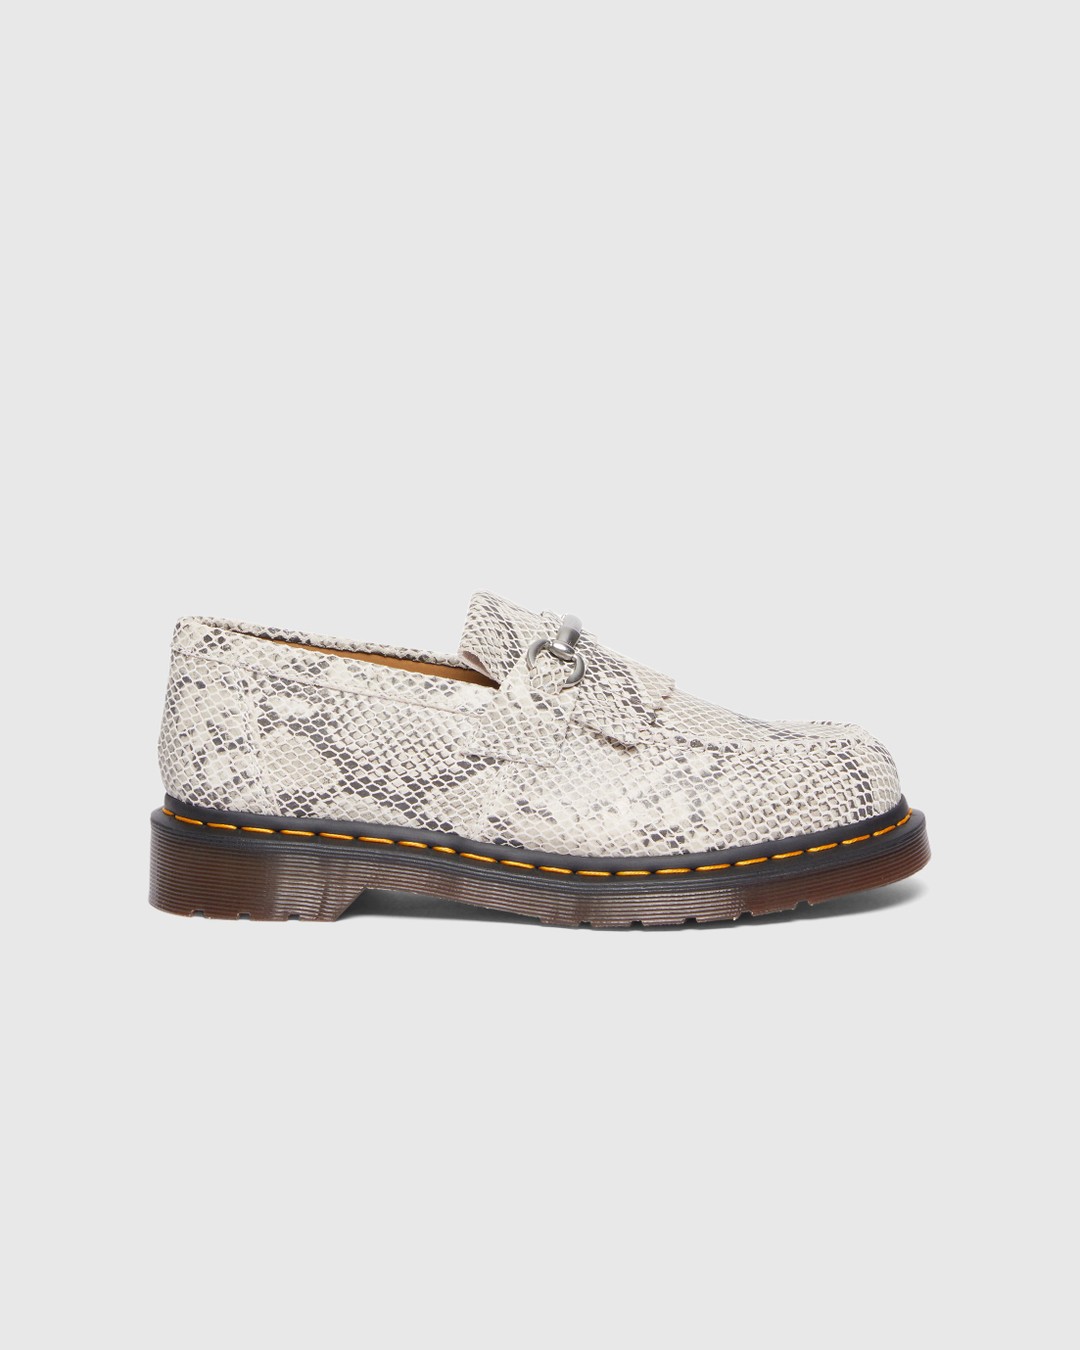 Dr. Martens – Adrian Snaffle Python Print Suede Loafers Sand/Black - Shoes - Grey - Image 1